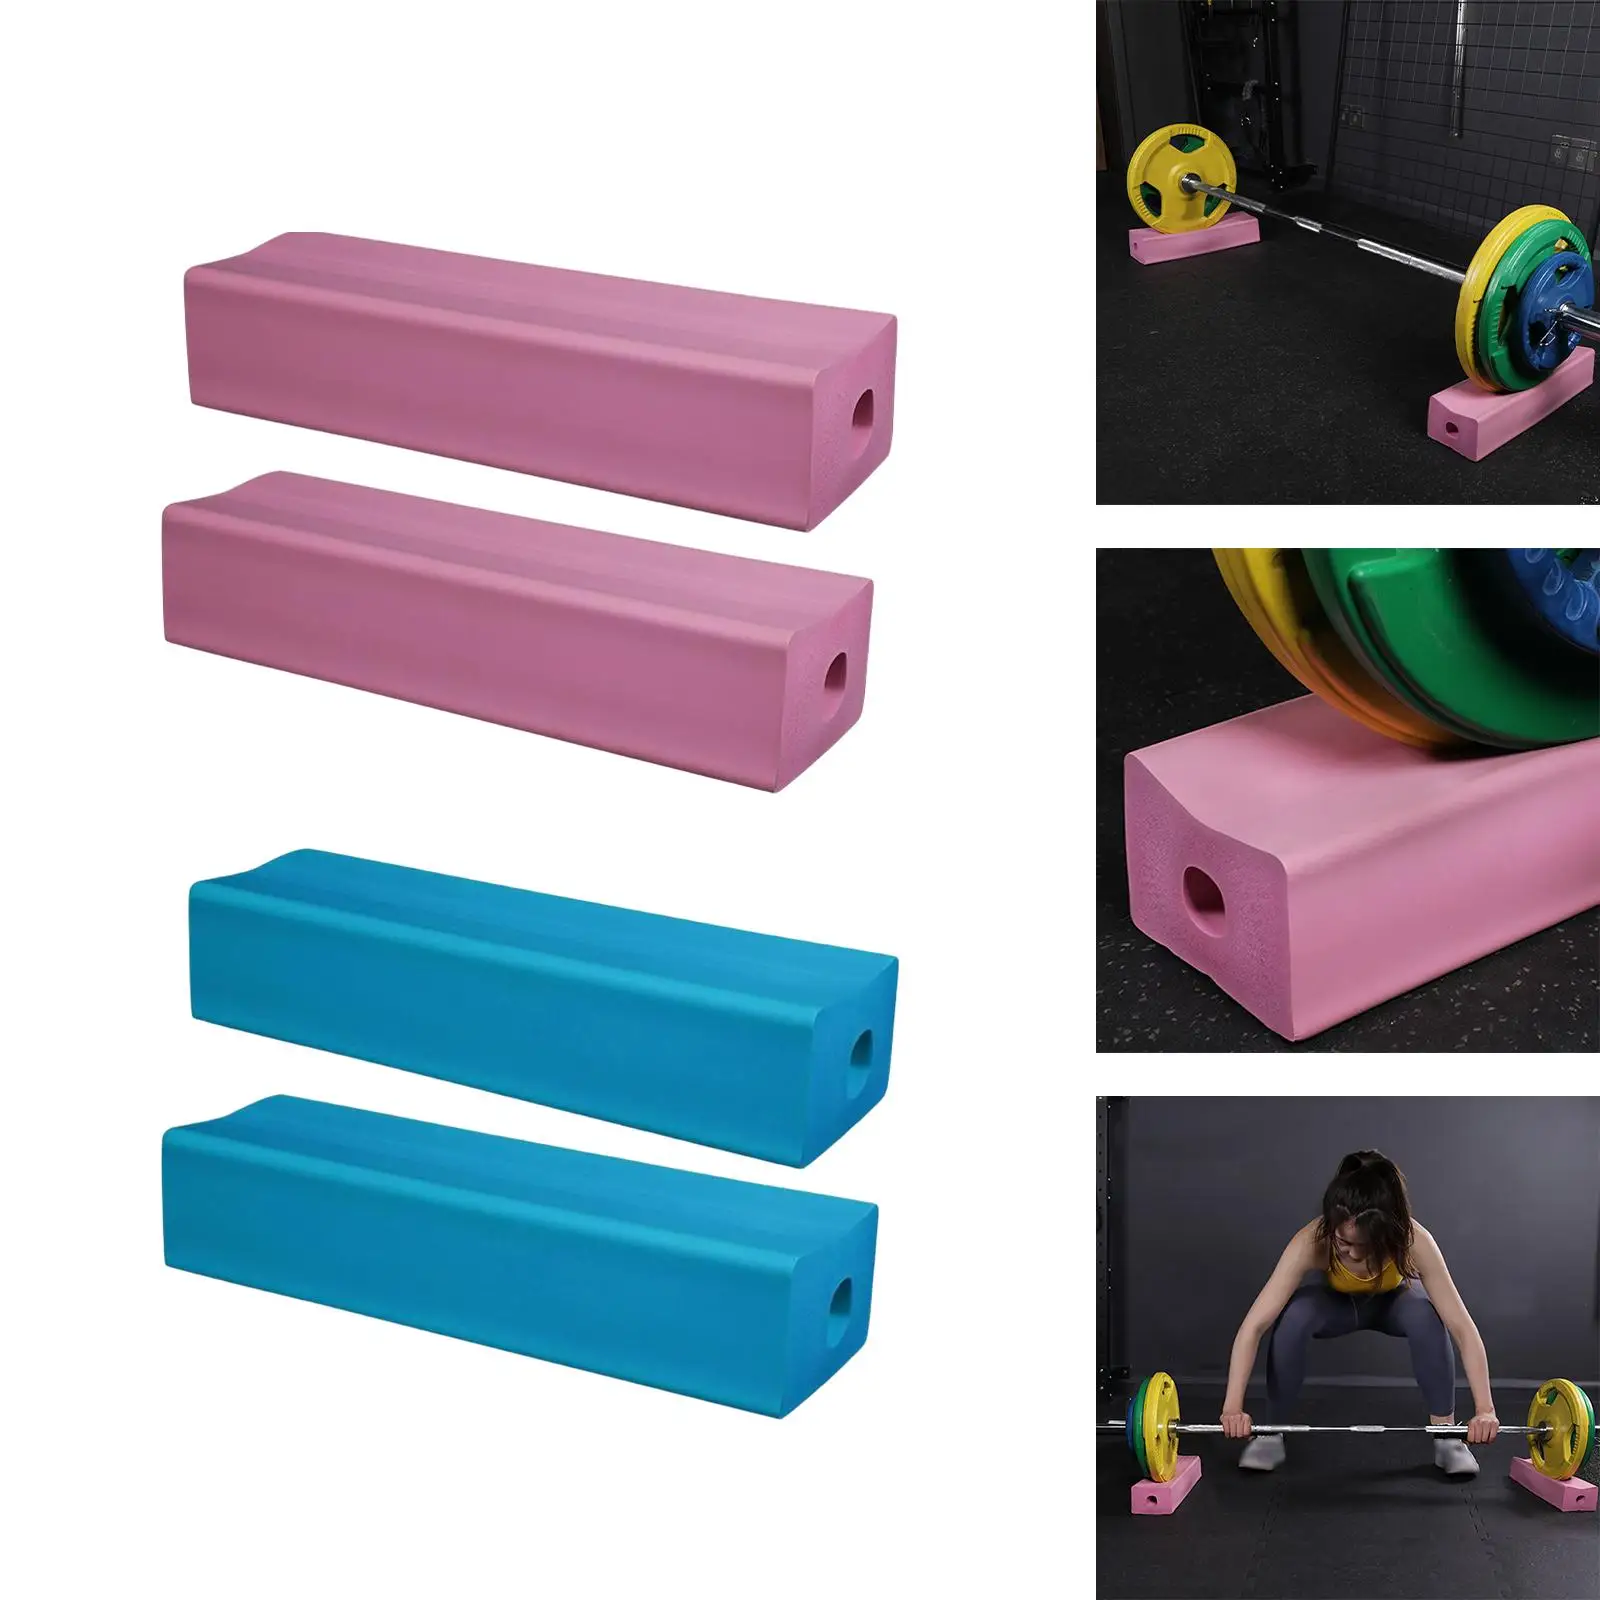 Barbell Crash Pad Thick Reducing Noise Protecting Floor Padded Cushion for Weightlifting Training Barbell Plates Home Office Gym